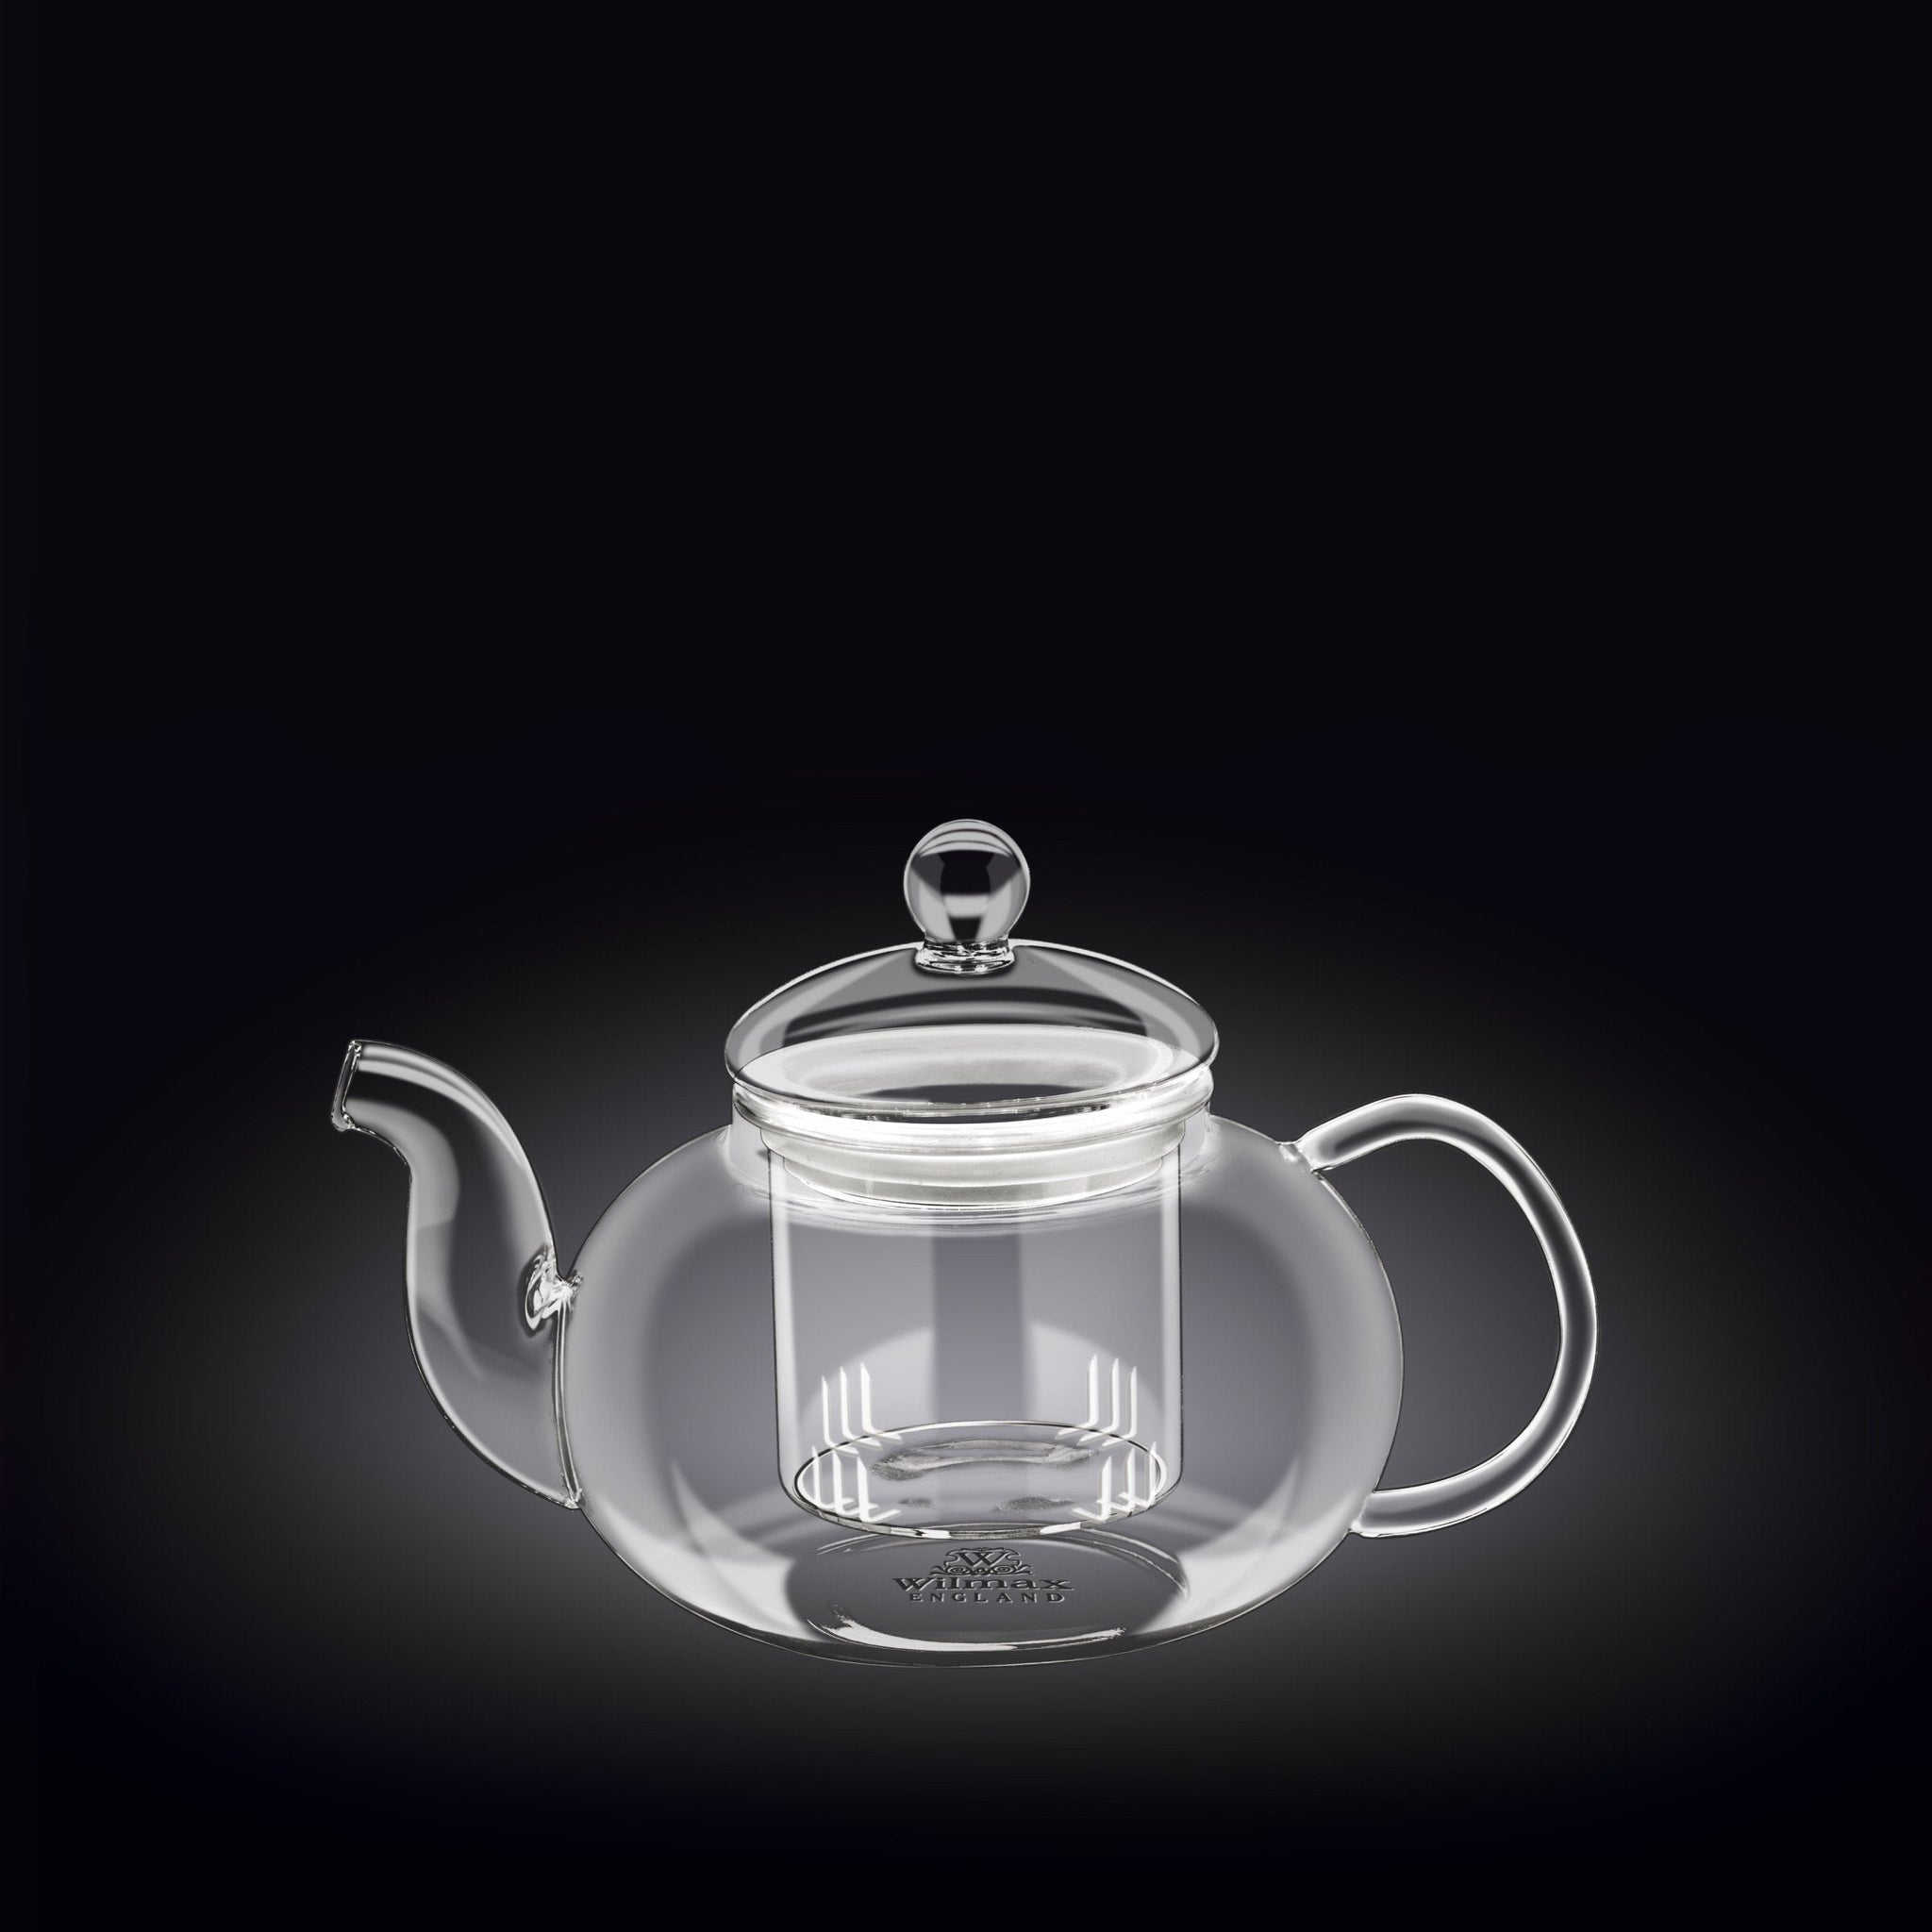 Thermo Glass Teapot 20 Fl Oz | High temperature and shock resistant by Wilmax Porcelain